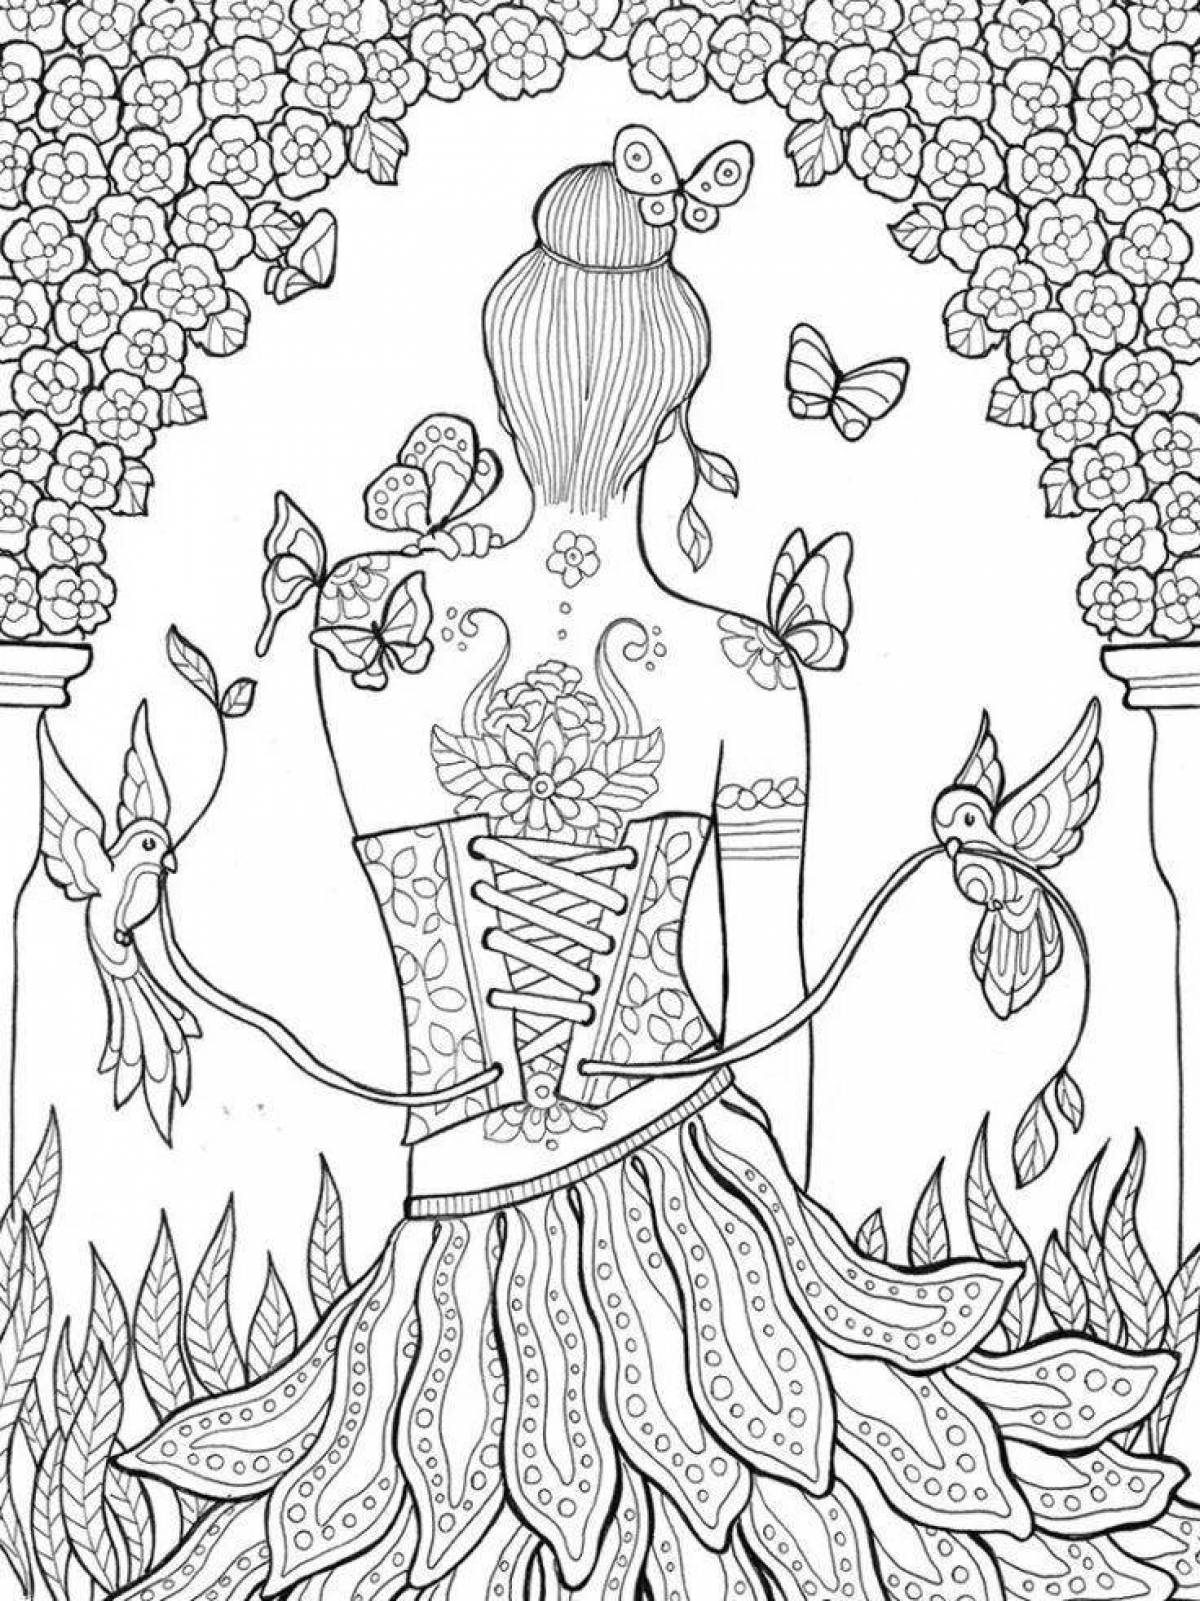 Recovery psychological anti-stress coloring book